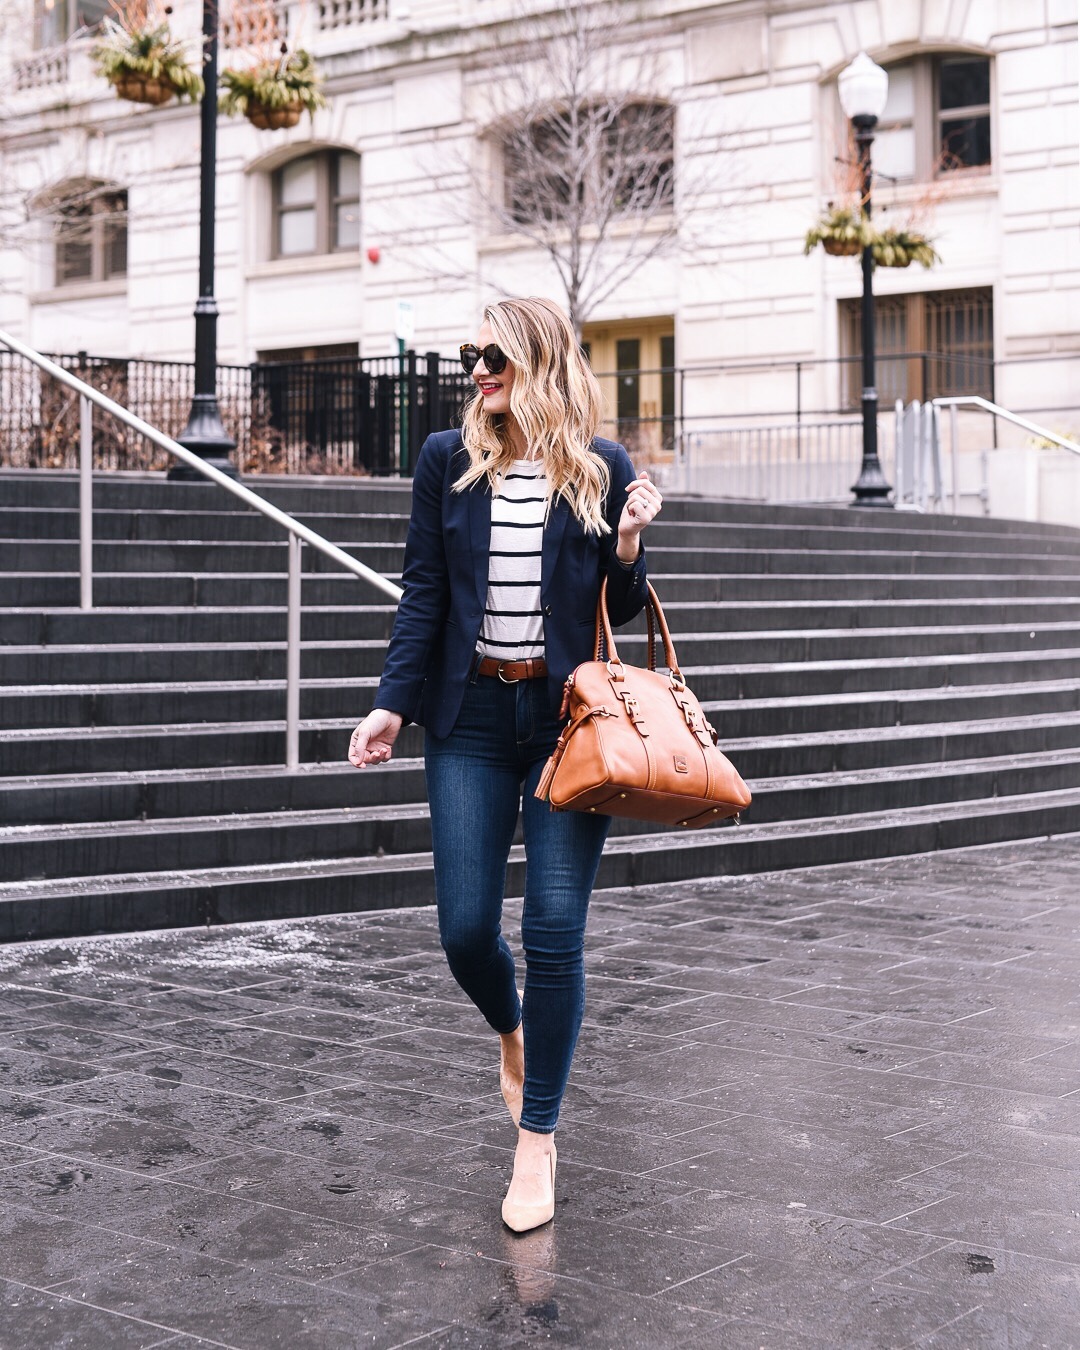 what to wear to work with a navy blazer - January Instagram Fashion Roundup (15 Outfits) by popular Chicago fashion blogger Visions of Vogue